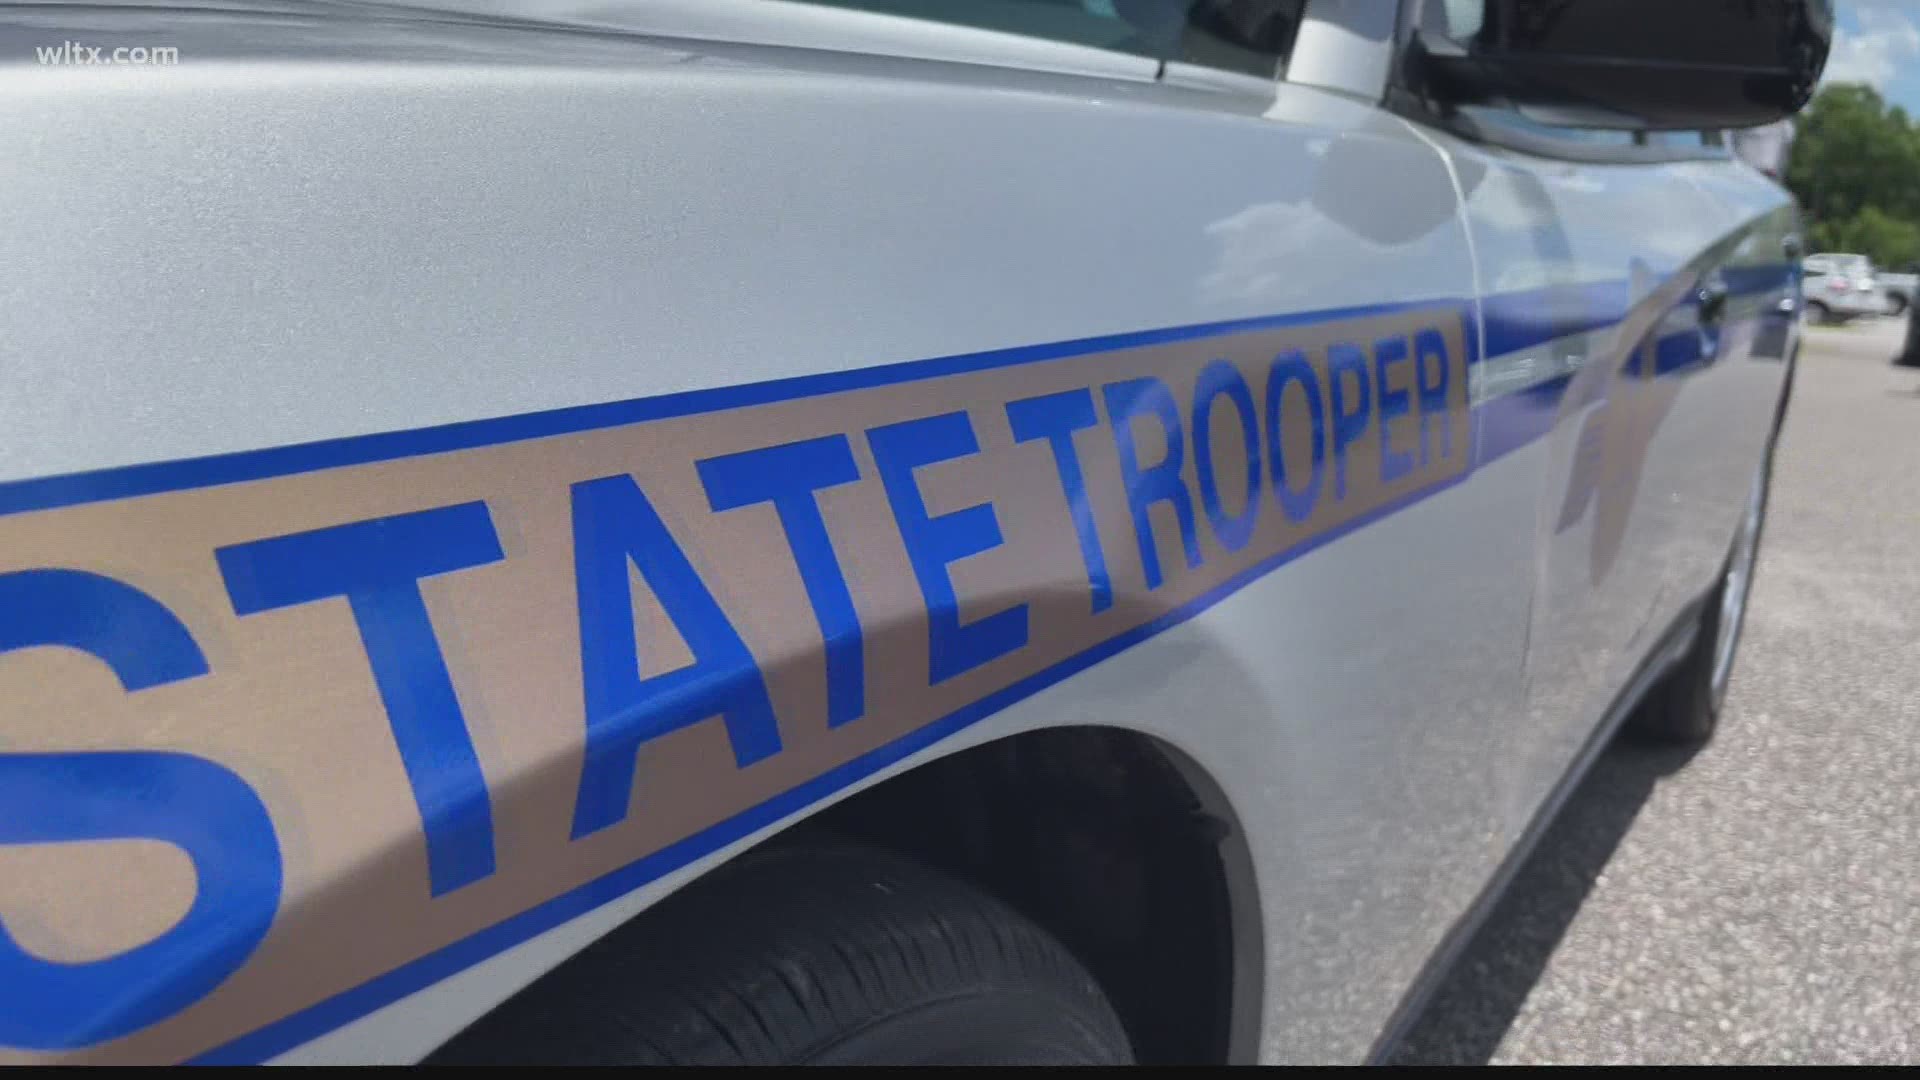 The driver that authorities say was heading east in the westbound lanes died at the crash scene, the South Carolina Highway Patrol said.